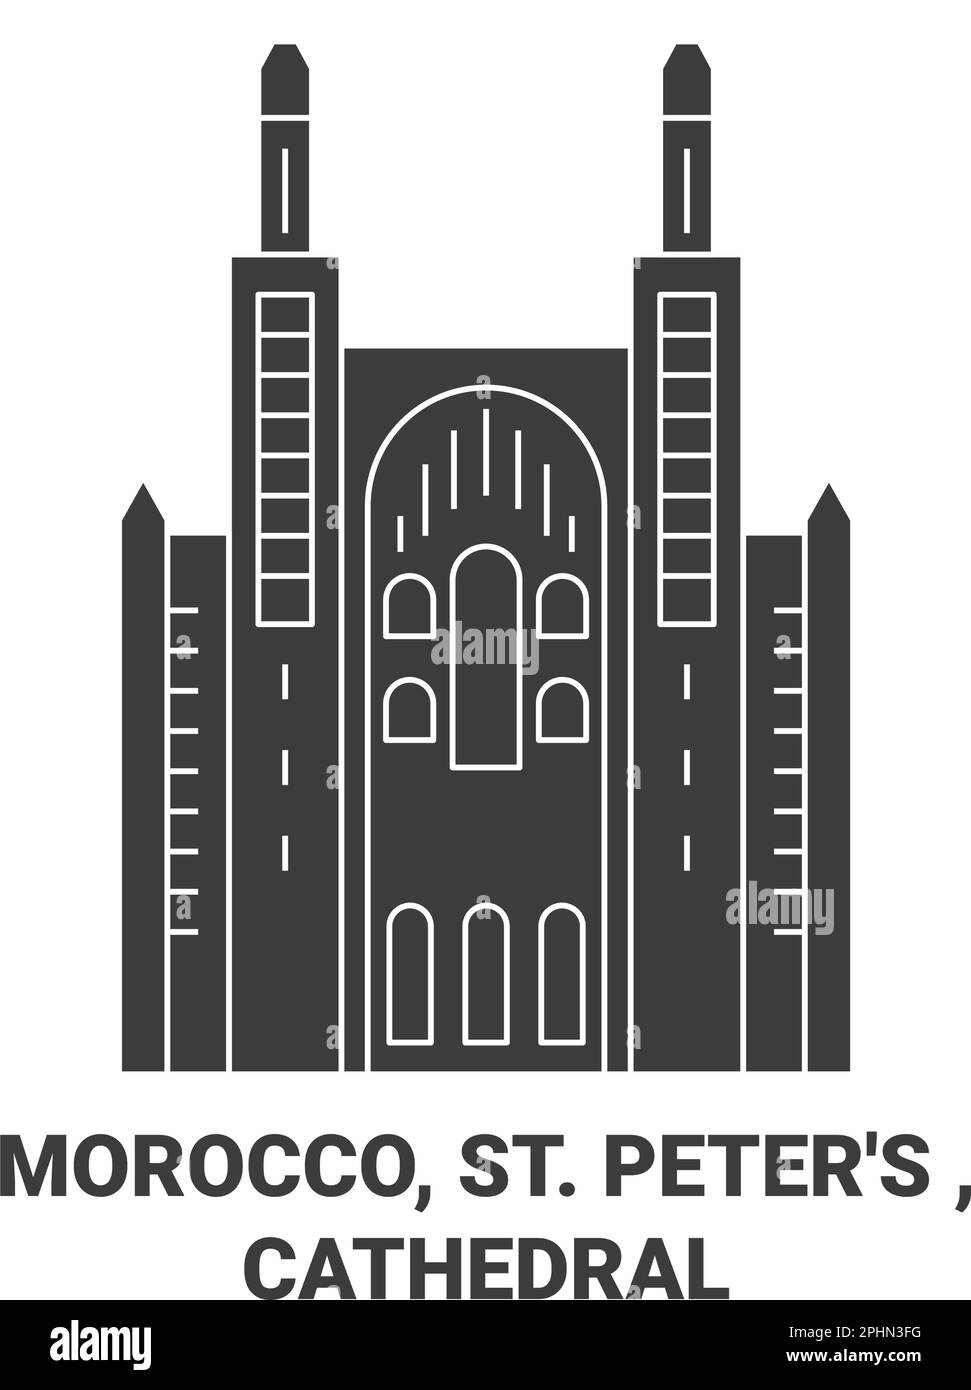 Morocco, St. Peter's , Cathedral travel landmark vector illustration Stock Vector